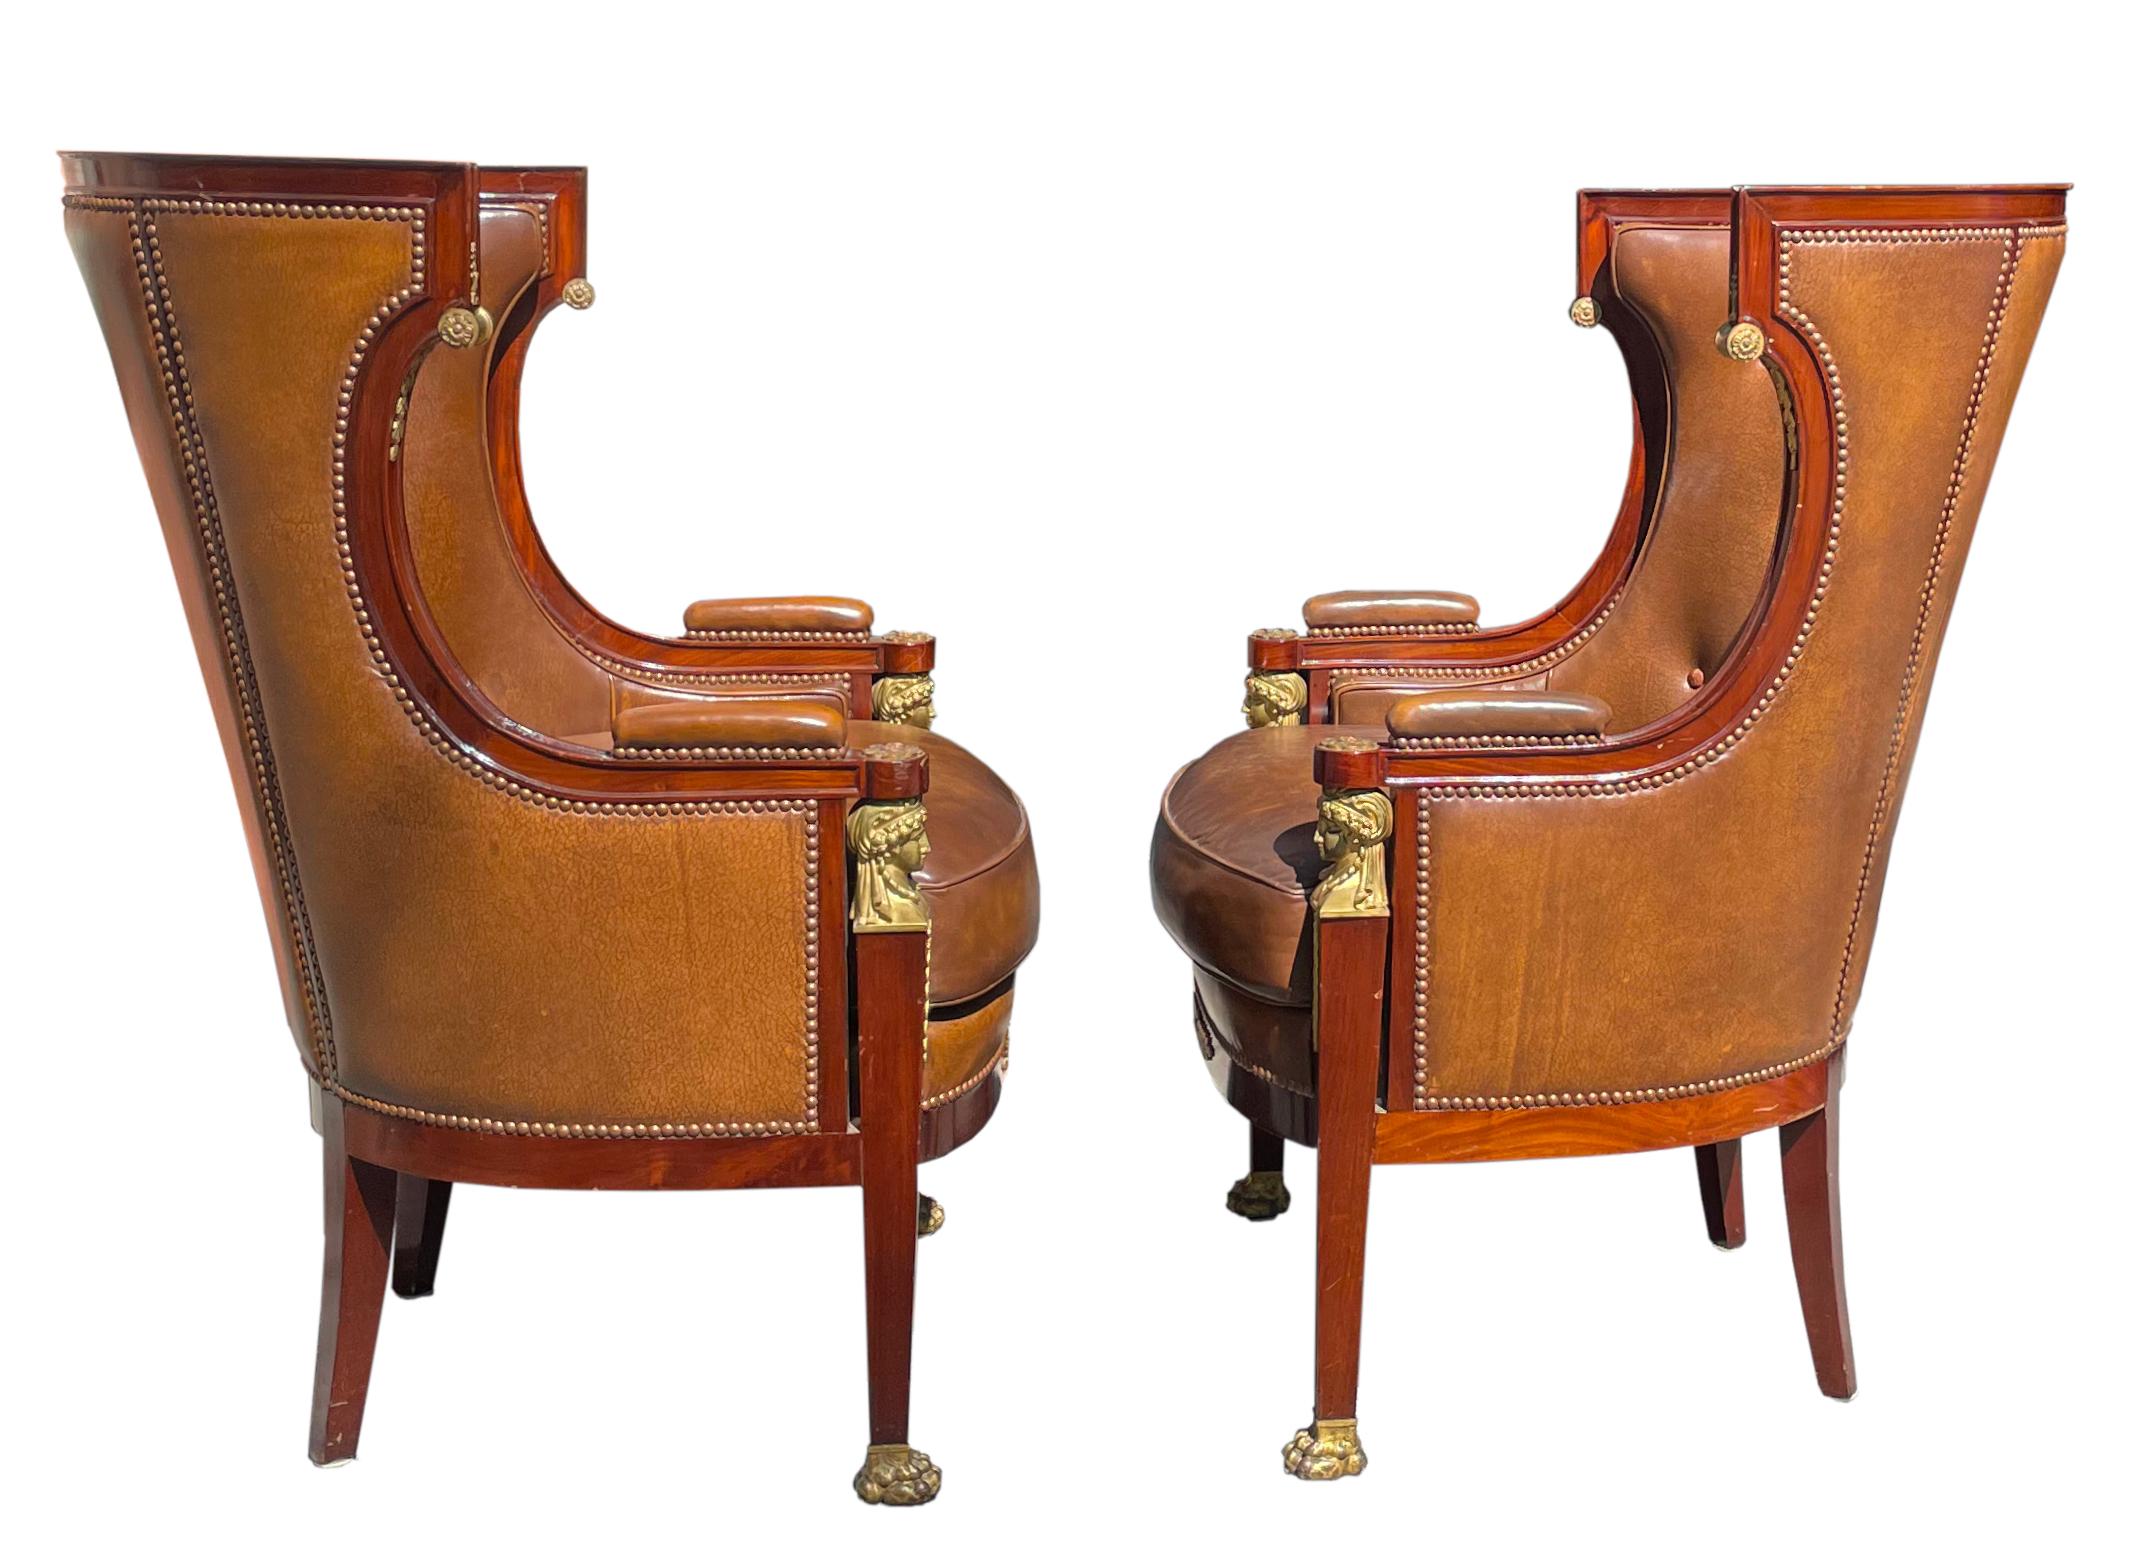 
Pair Empire Style Leather-Upholstered Gilt Bronze Mid. Mahogany Bergere
French, Circa 1900. Each curved back with tufted brown leather upholstery, continuing around to the sides, the molded rails and arm supports with gilt bronze foliate and